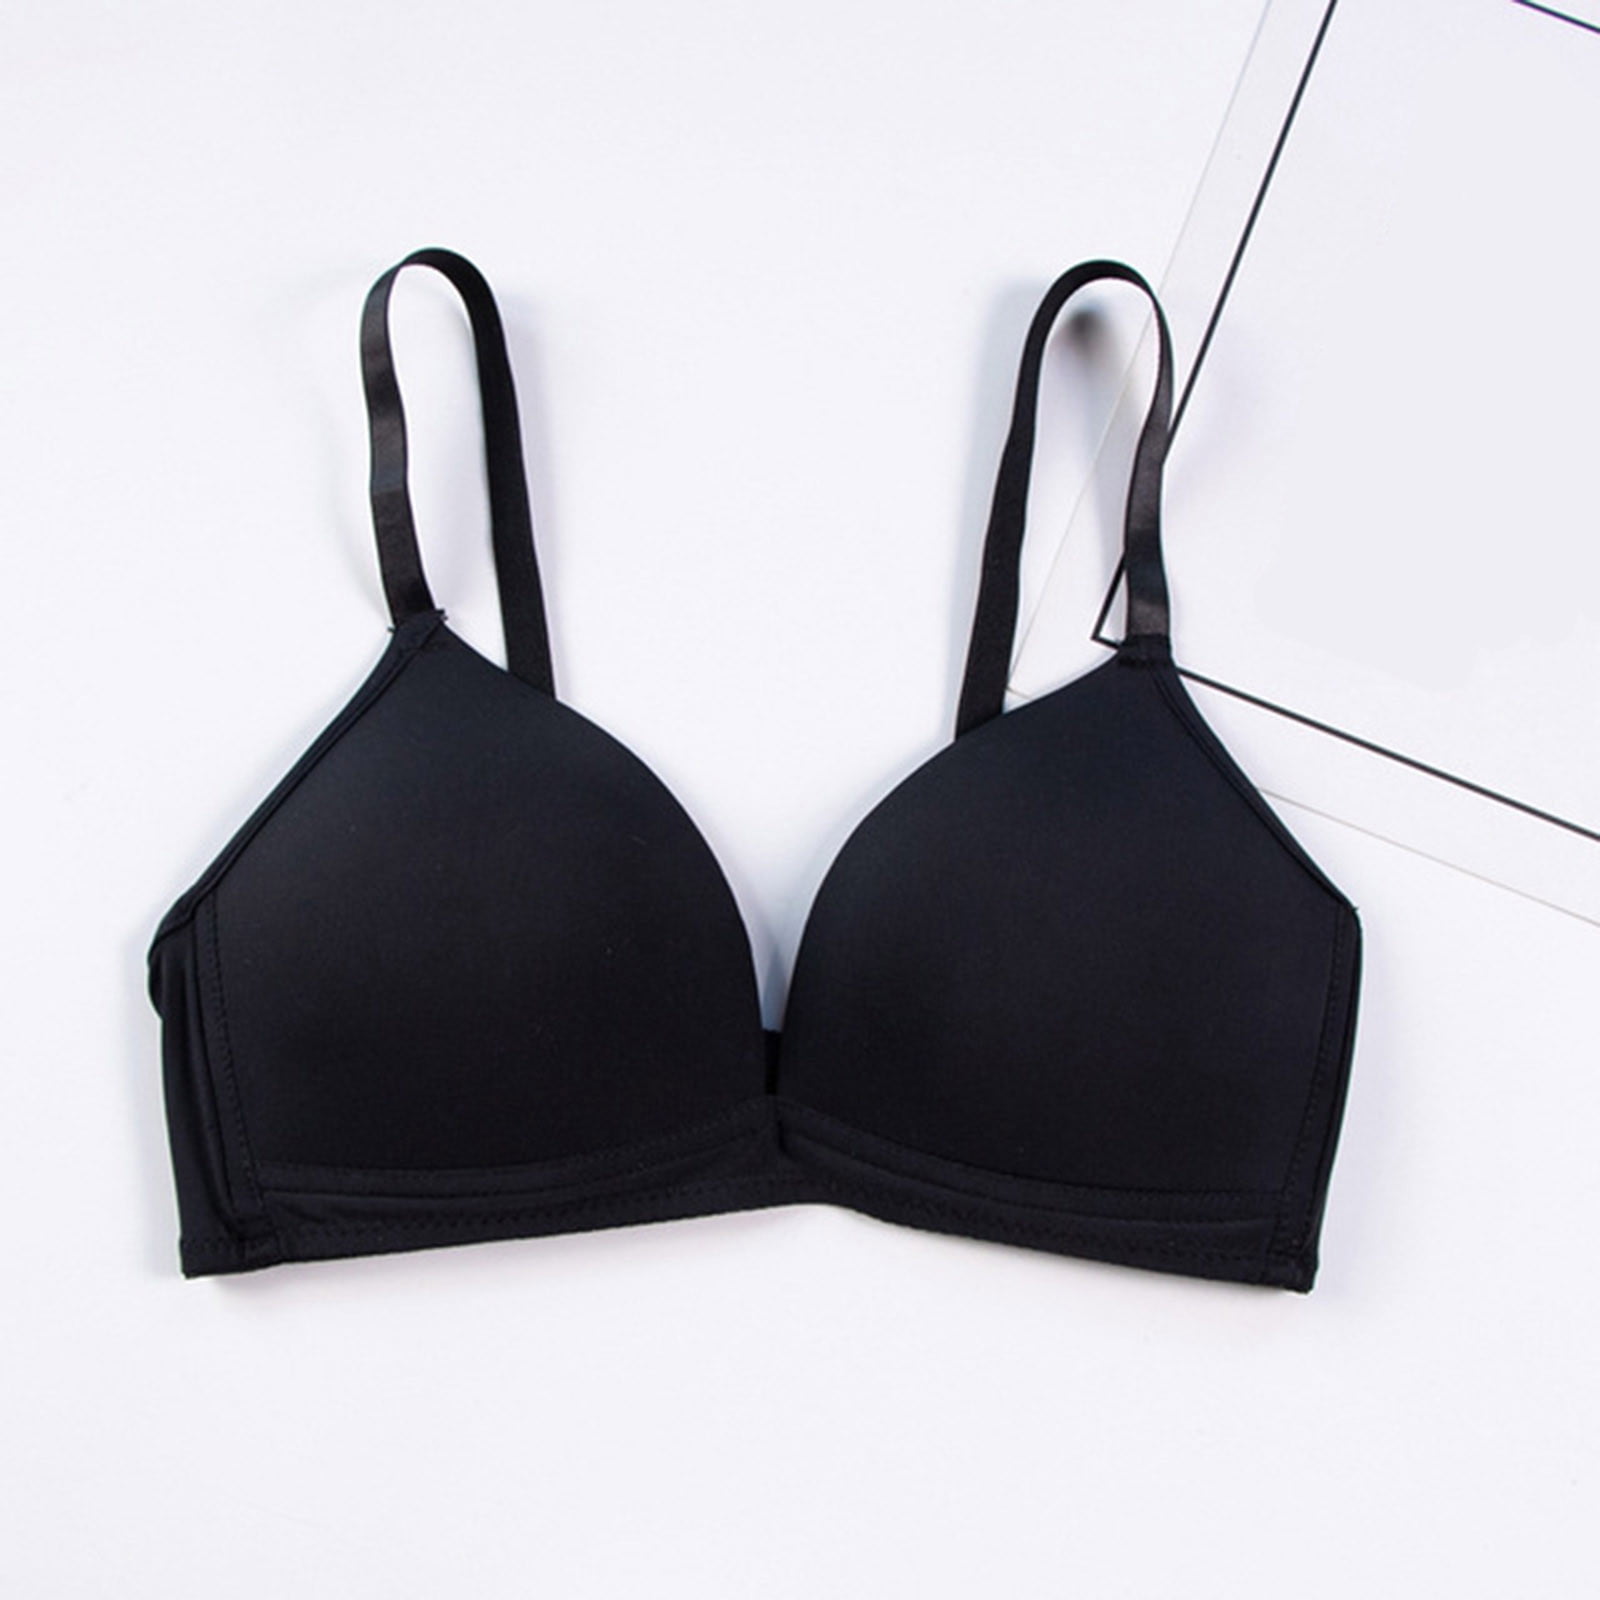 Pepper Underwire Bra  Classic All You Underwire Bras for Women with Soft  Fabric, Relaxed Fit, Ultra Comfy Bra Without Gaps, Black Bra (30A-40B) at   Women's Clothing store